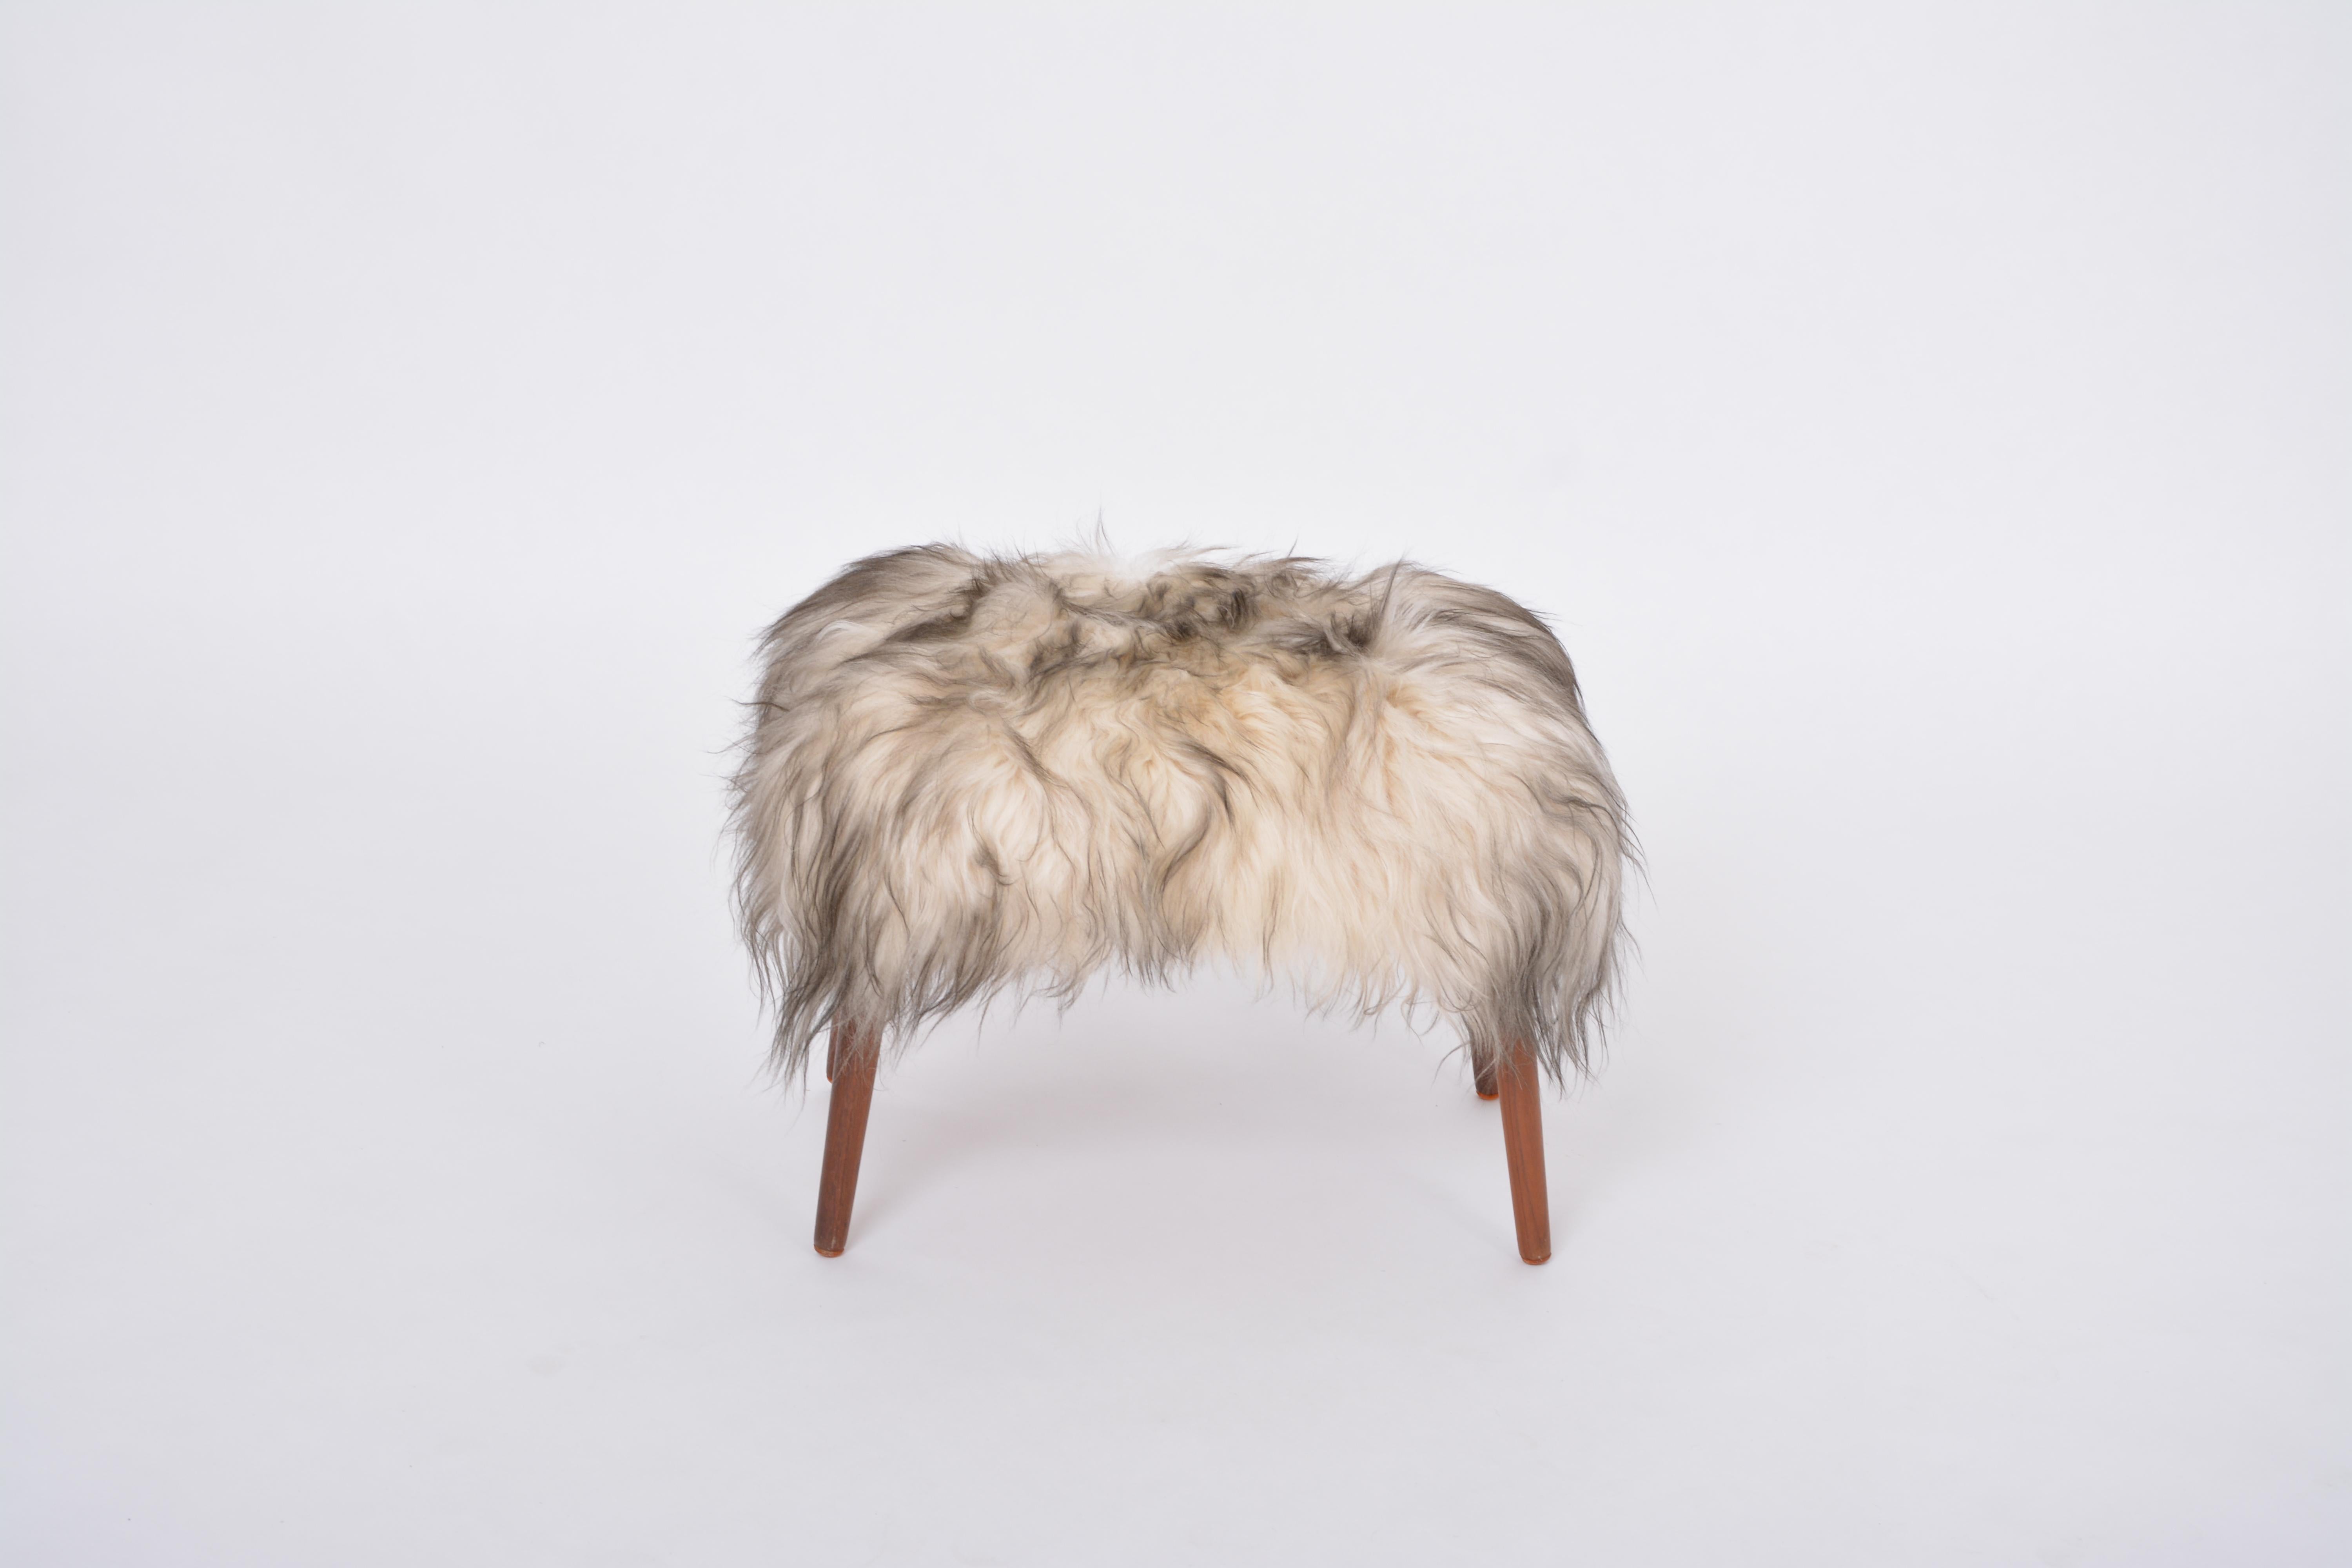 Danish Mid-century Modern stool reupholstered in white and black sheep skin
This ottoman/pouf/ stool was designed and manufactured in the 1950s in Denmark. It is made of  wood and has been reupholstered with a long haired white and black sheep skin.